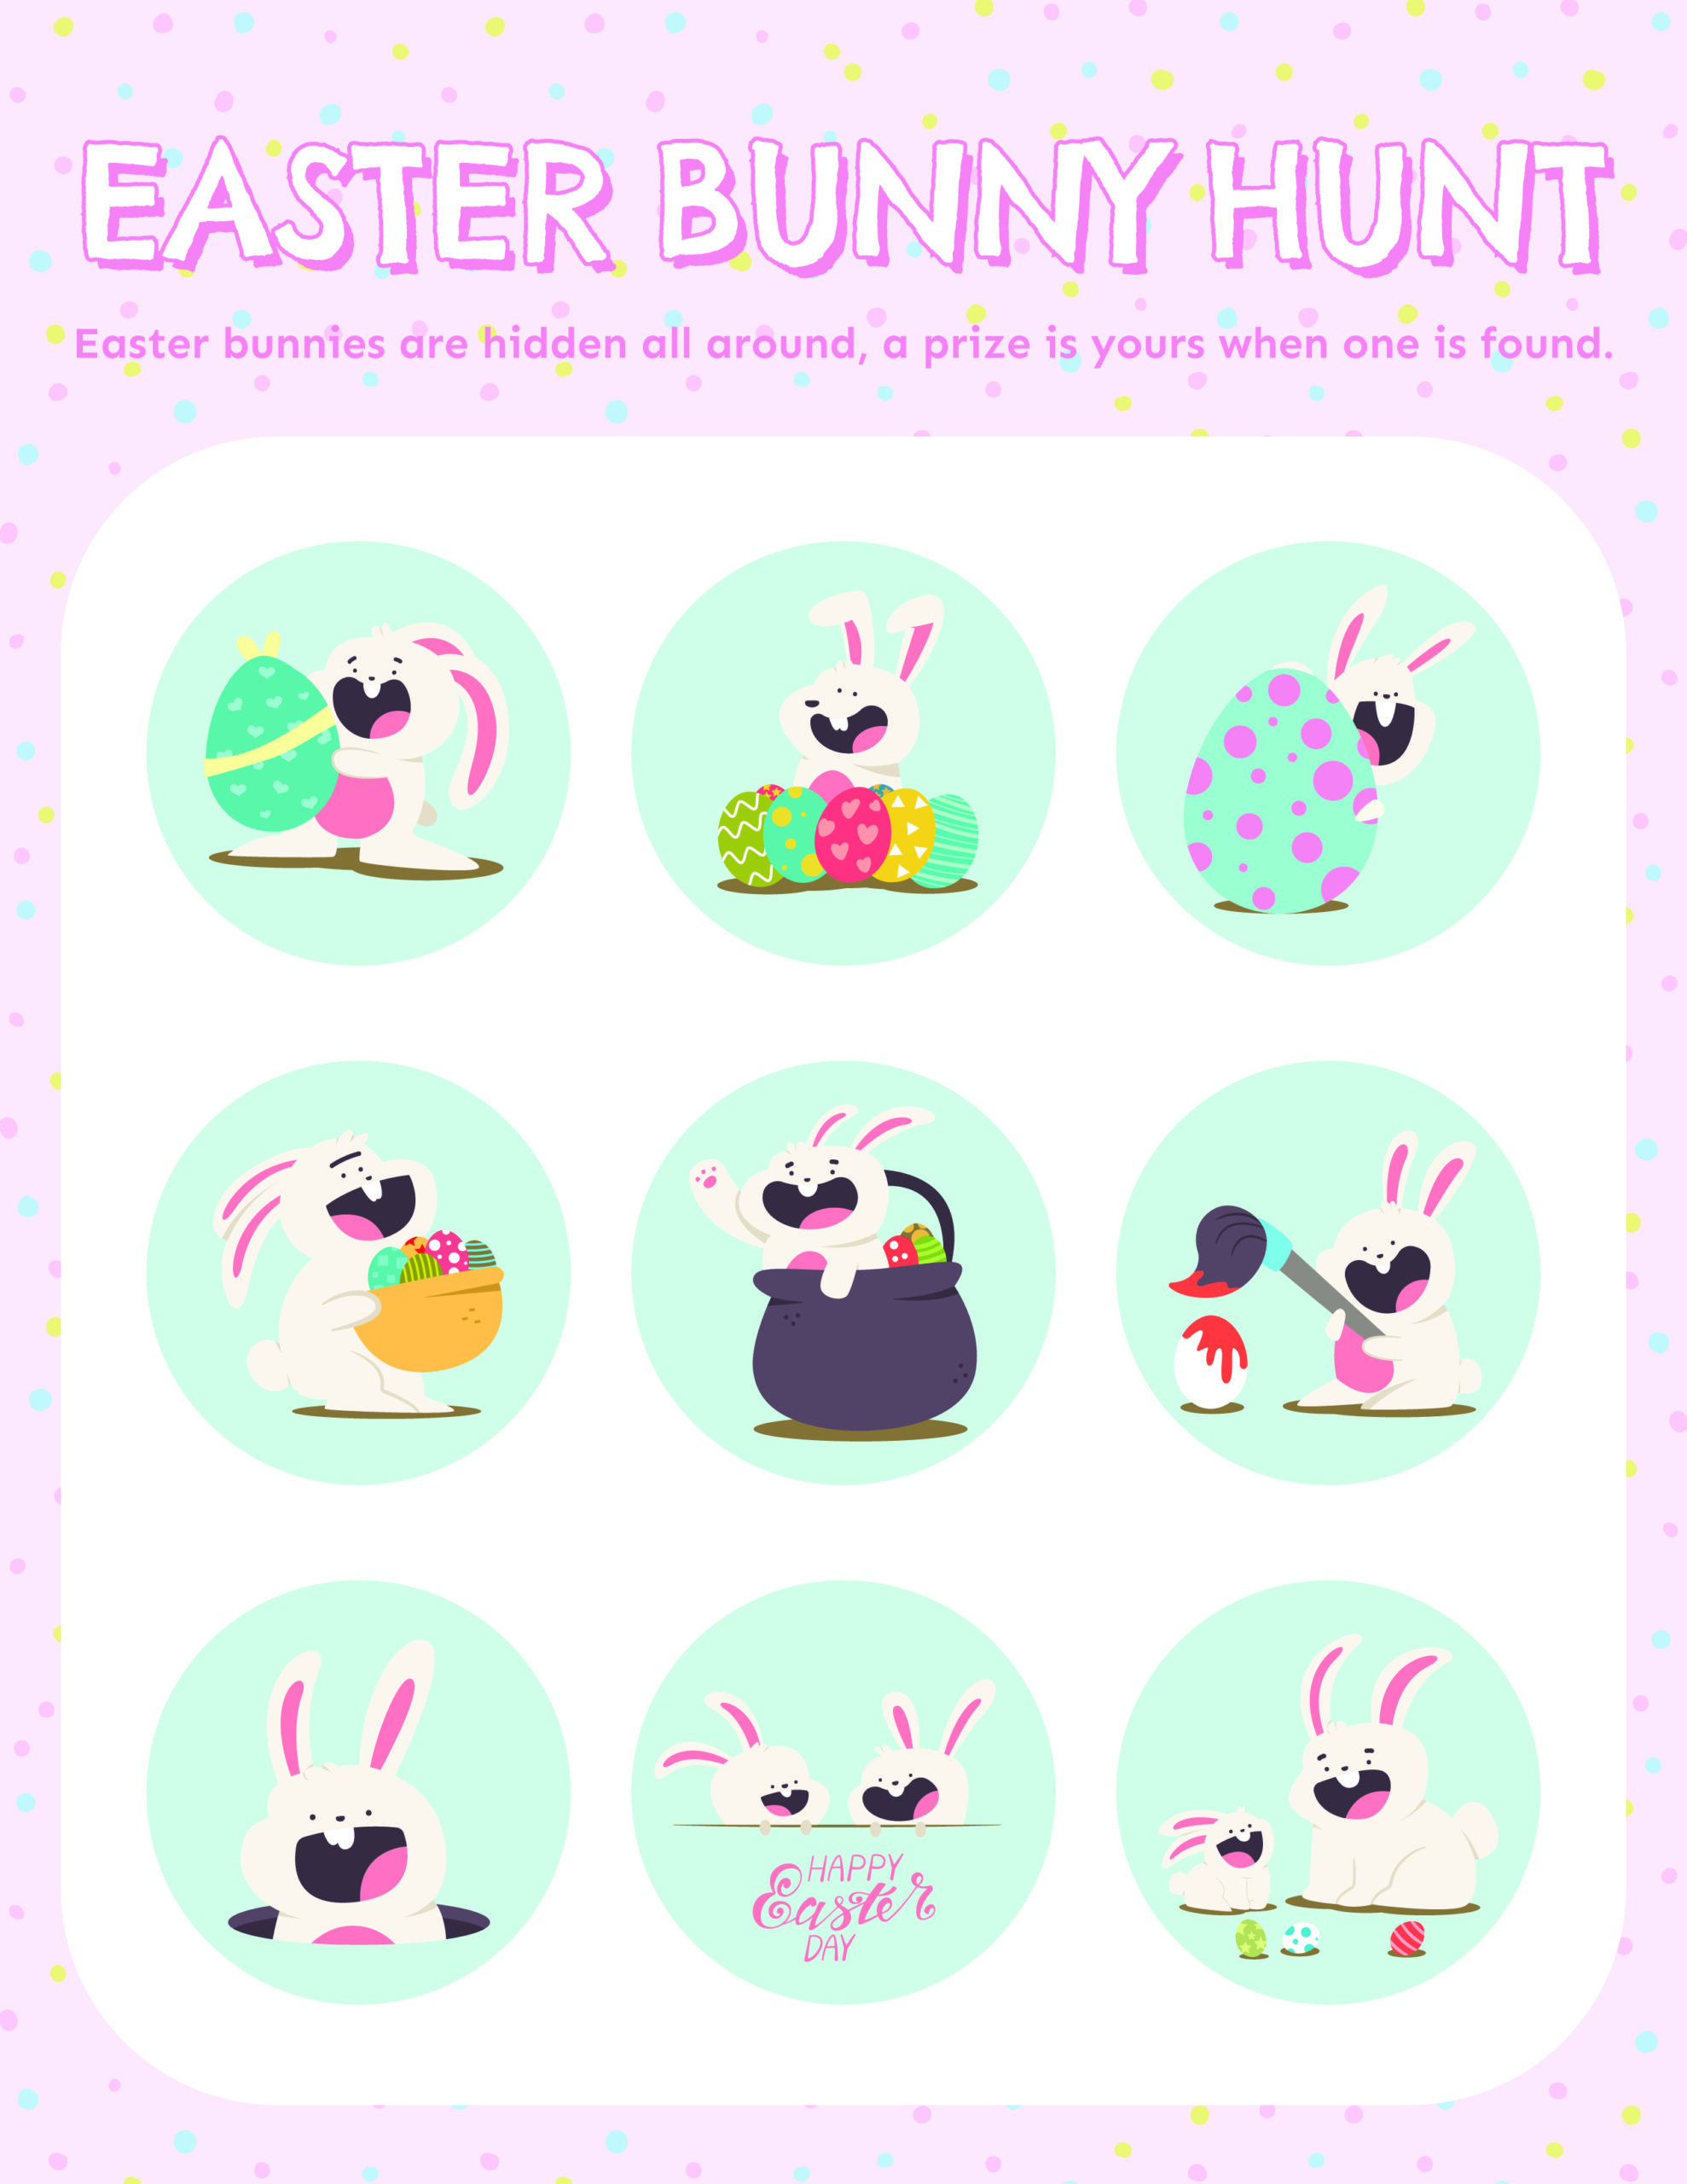 Easter bunny hunt page